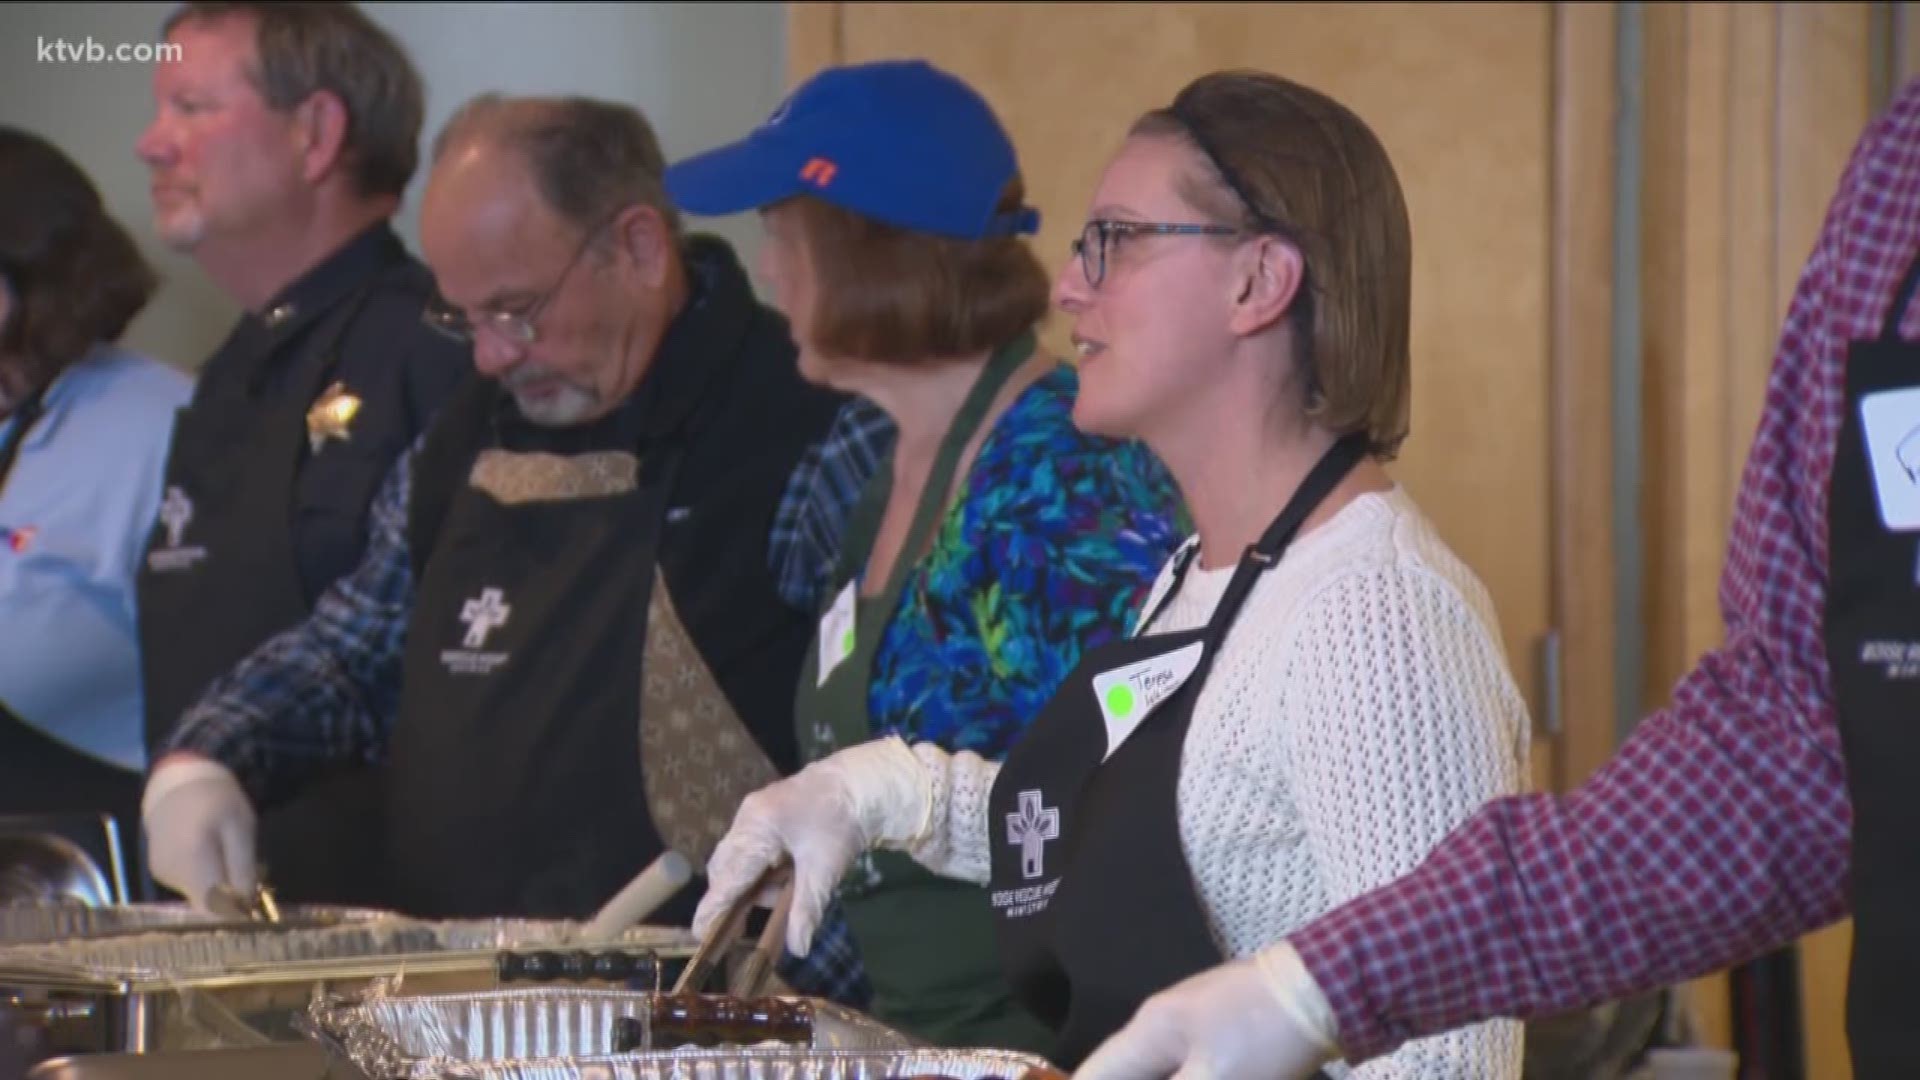 We visited the Boise Rescue Mission's annual Thanksgiving banquet to find out what the volunteers there are thankful for this holiday season.